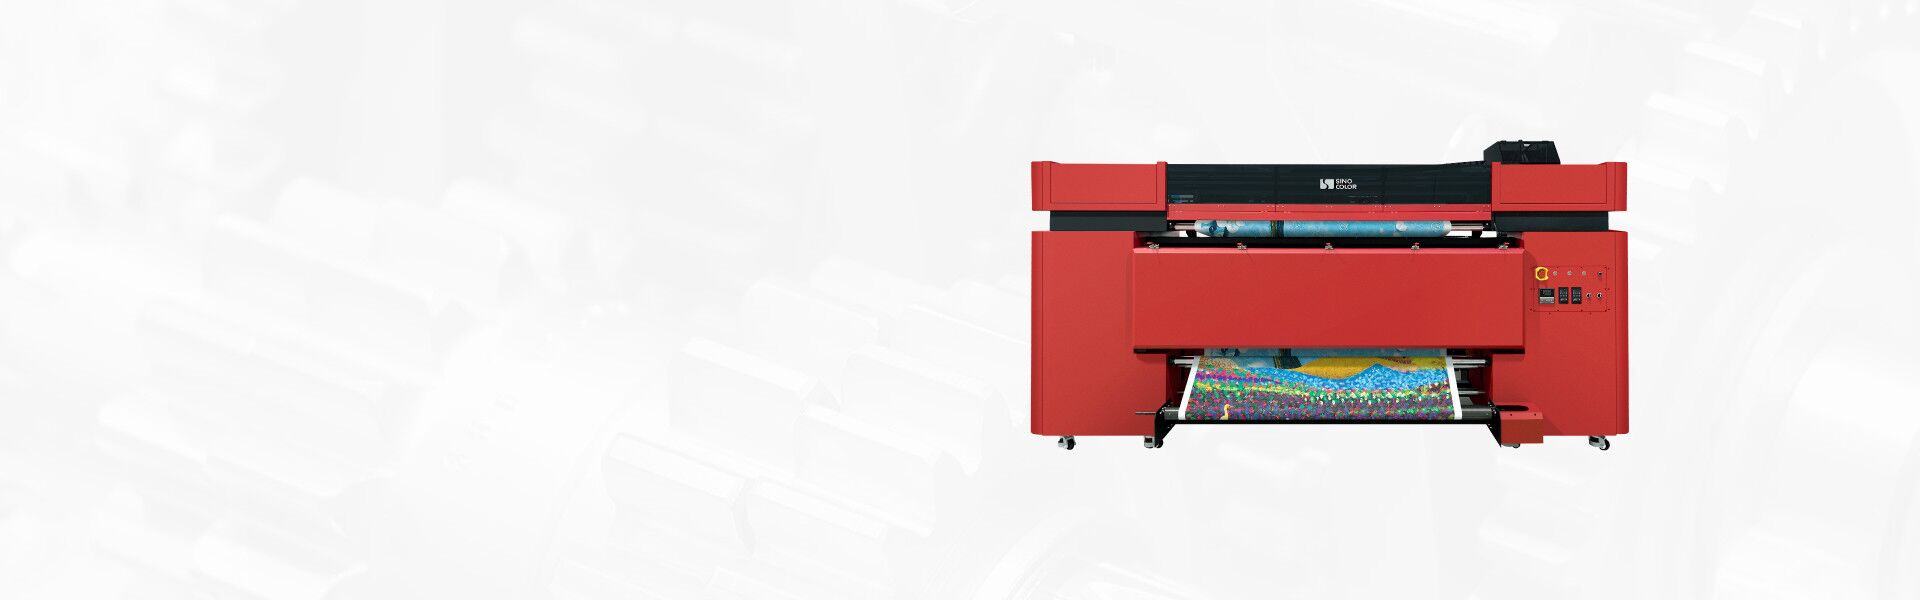 http://www.sinocolordg.com/products/textile-printer/direct-polyester-cotton-printer/direct-polyester-printer-fp-740s.html images